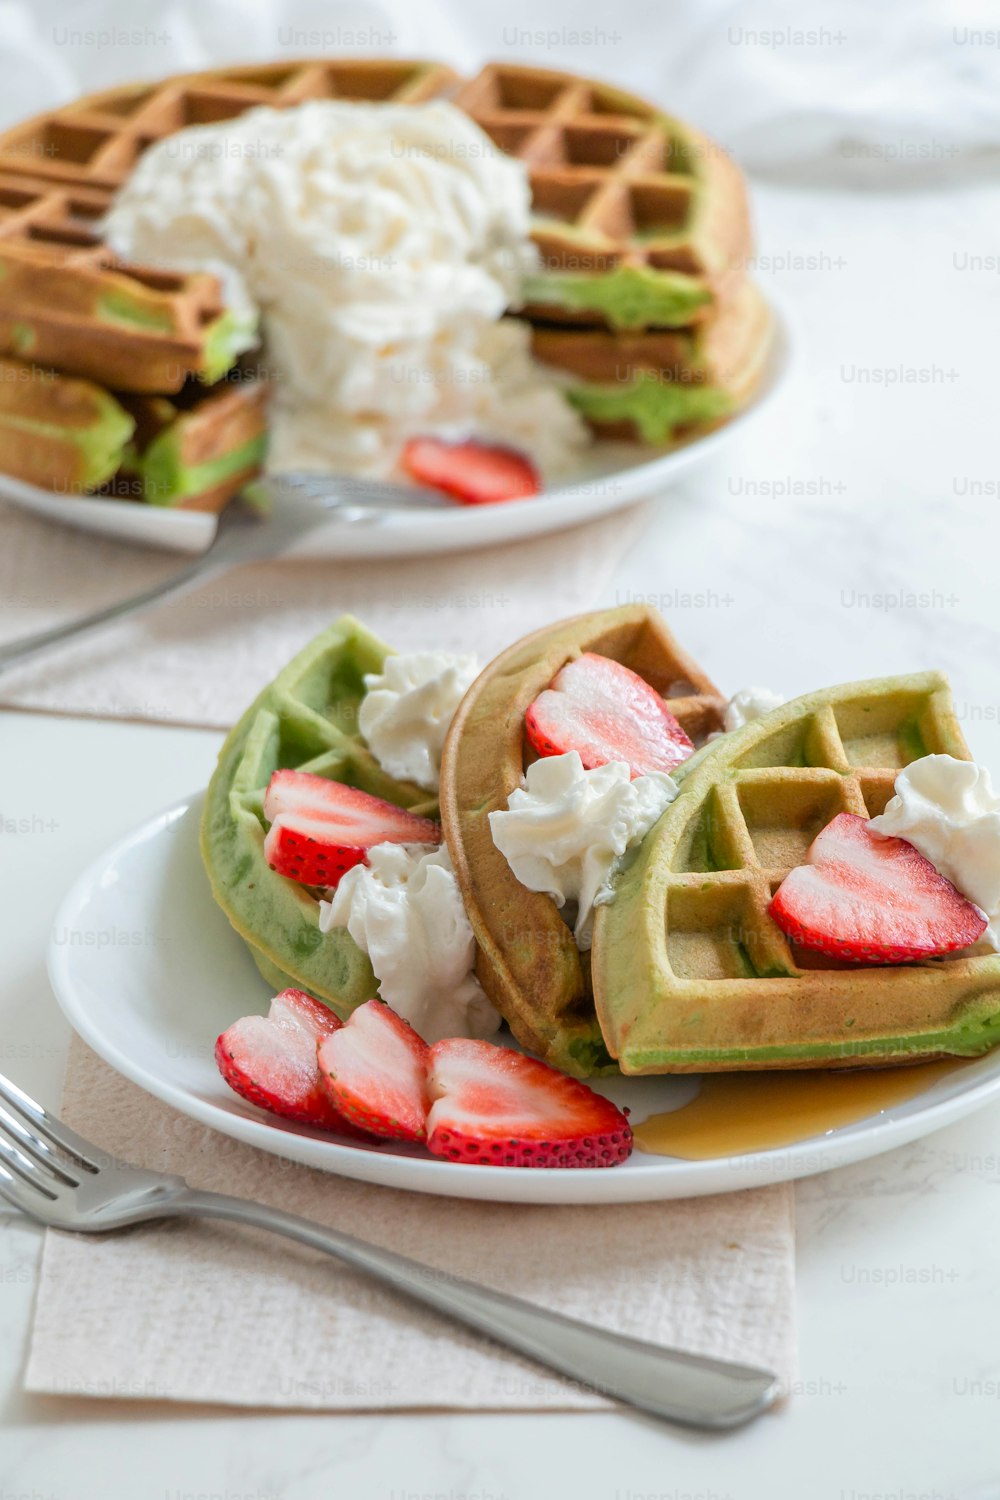 a plate of waffles with strawberries and whipped cream